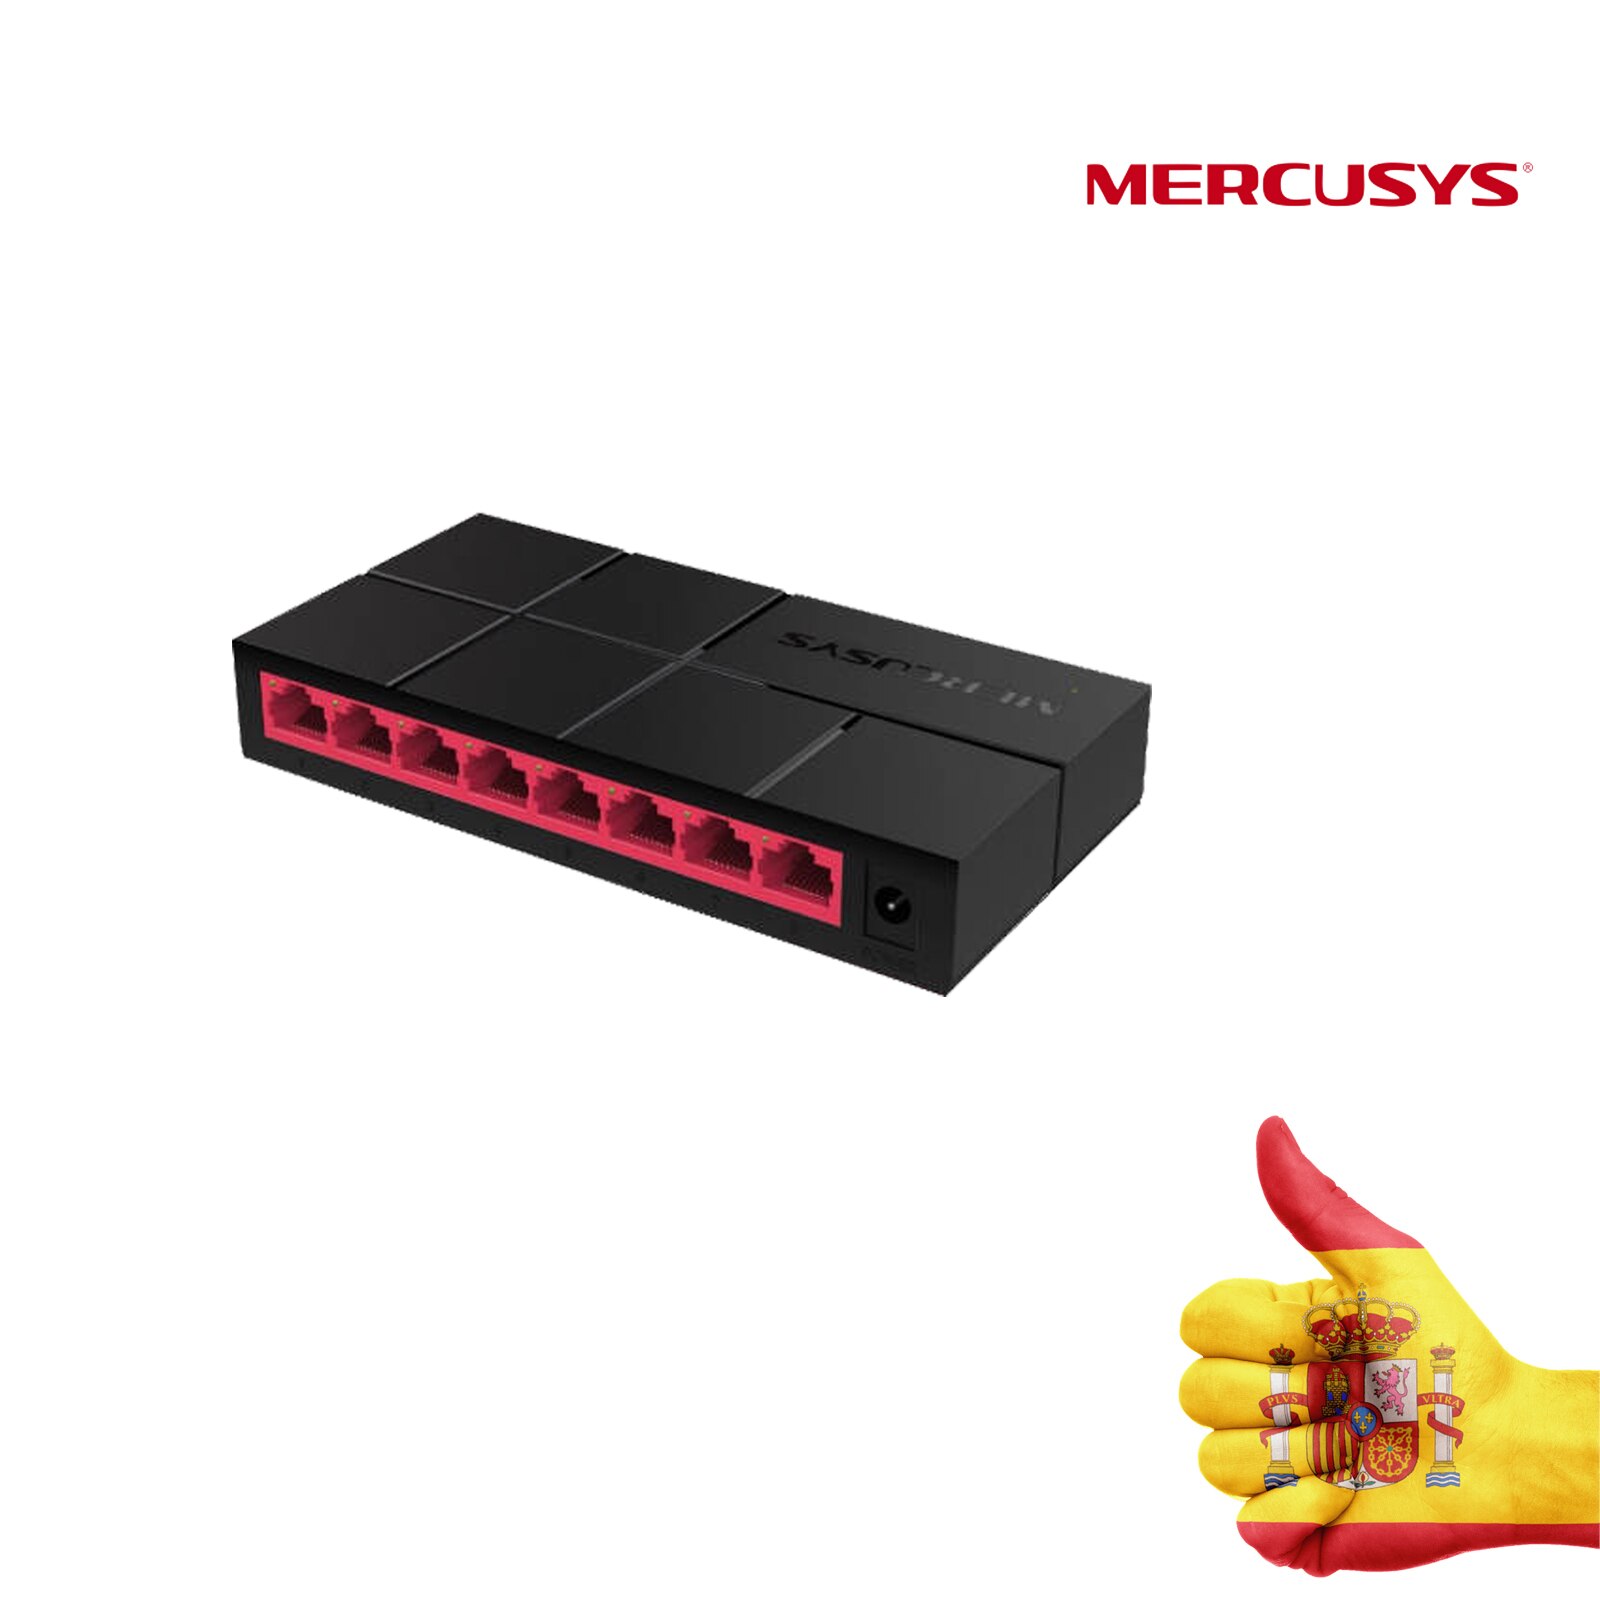 MERCUSYS MS108G 8-POORT 10/100/1000M acht poorten Ethernet switch